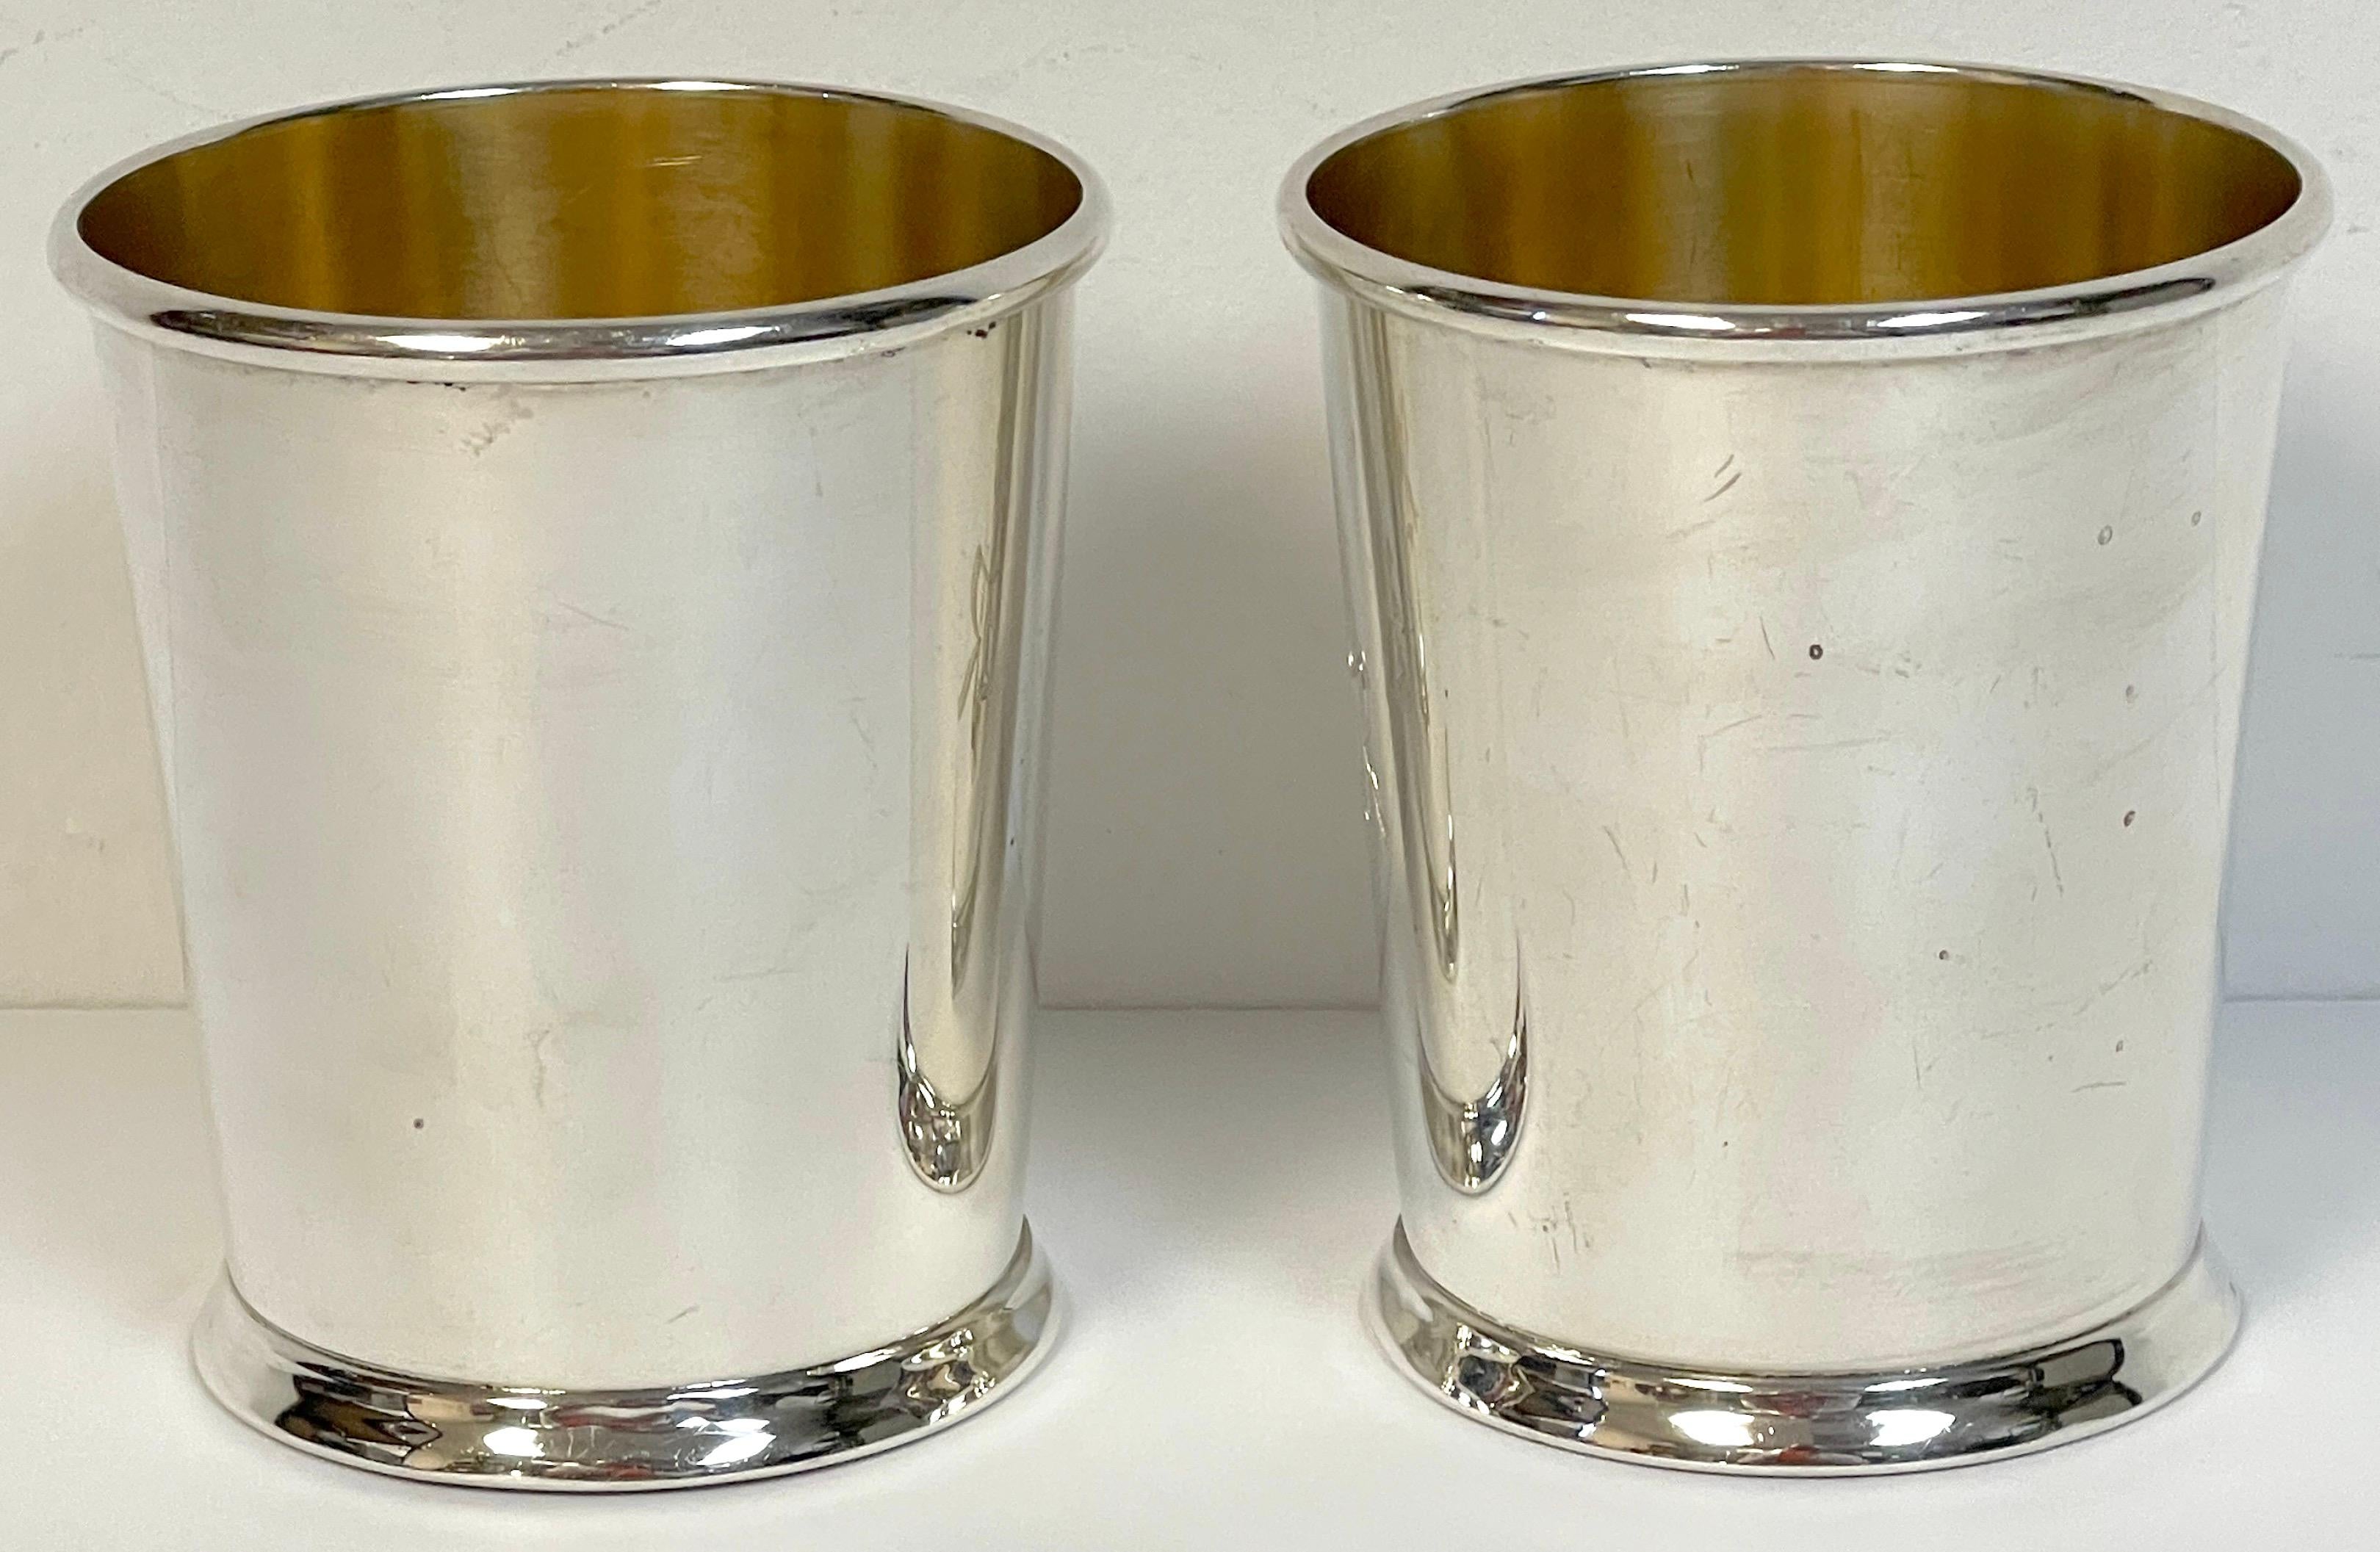 Gilt Pair of American Sterling Mint Julep Cups with Gold Washed Interiors